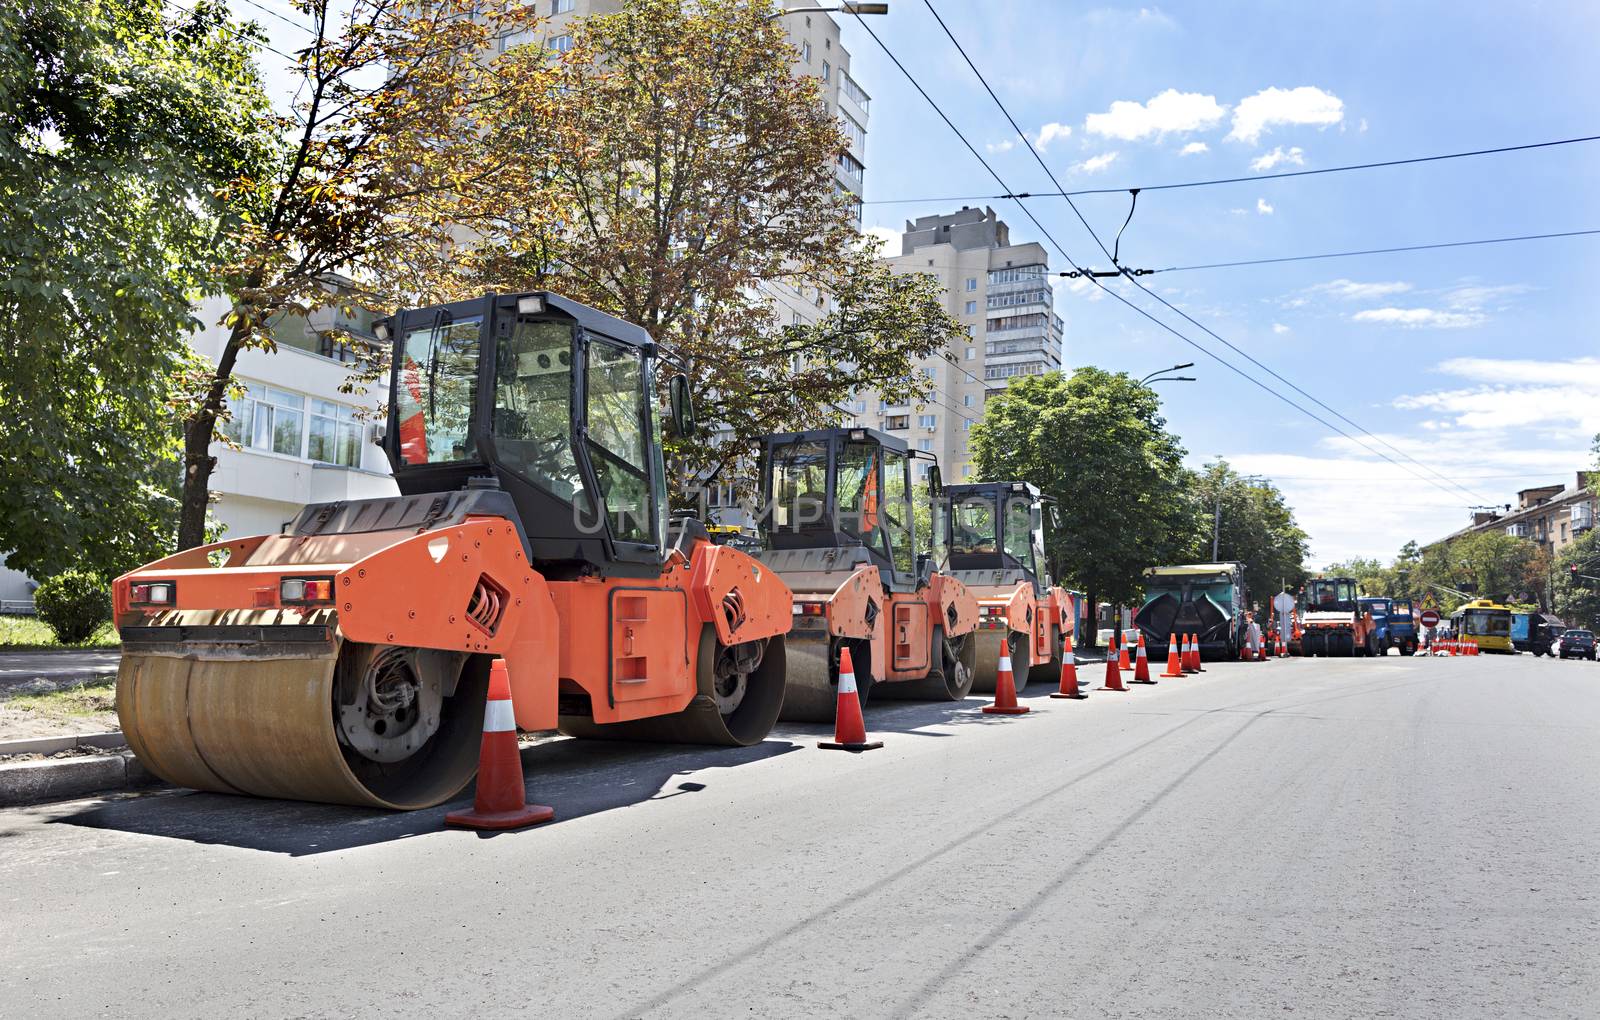 Among the summer noon three heavy road vibrating roller compactors and other equipment are ready for repair of the road in a modern city